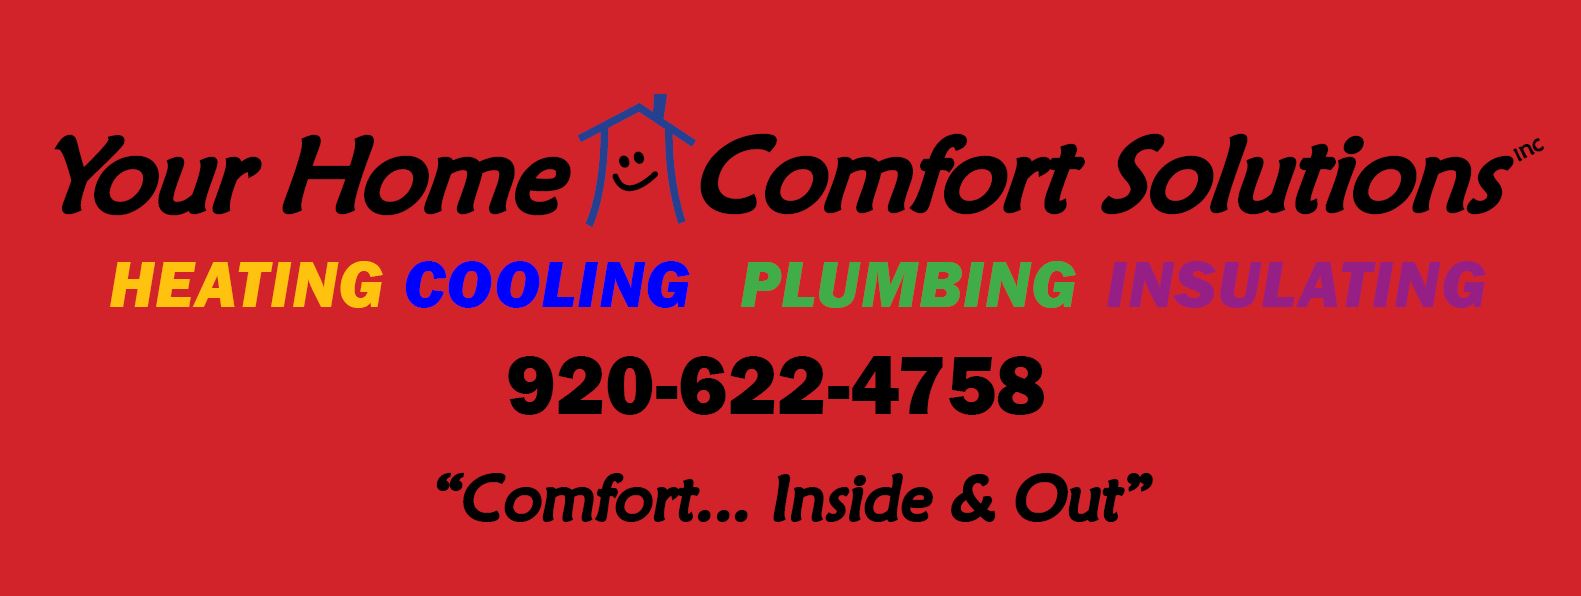 Your Home Comfort Solutions, Inc